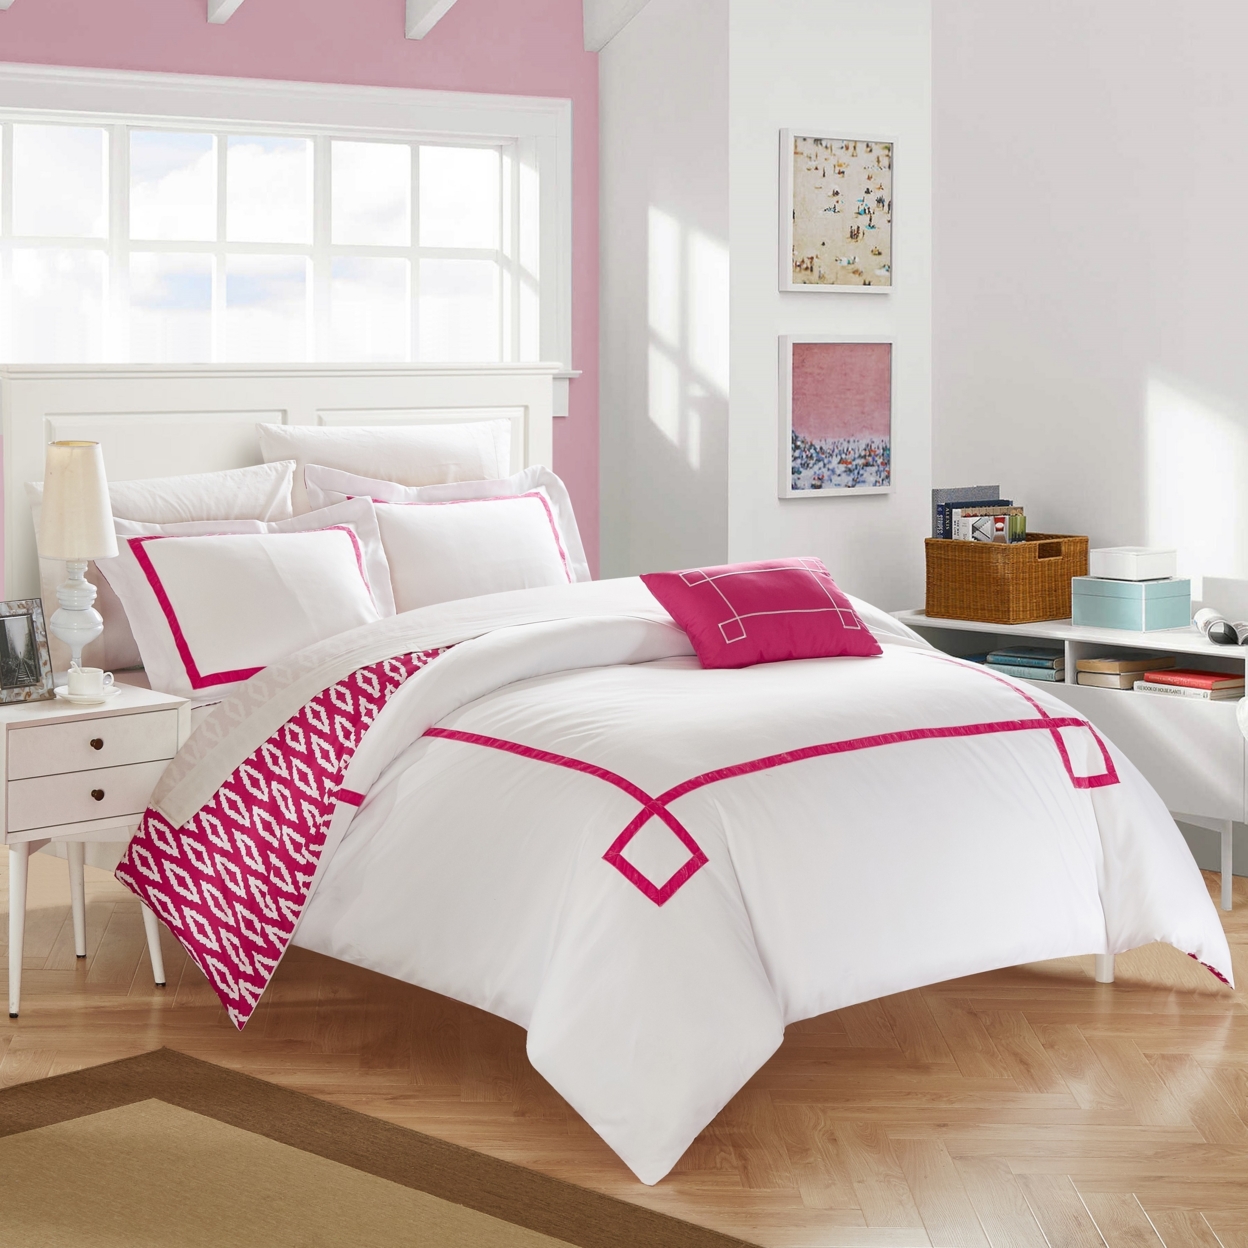 3/4 Piece Berwin Embroidered REVERSIBLE Duvet Cover Set With Shams And Decorative Pillows Included - Fuchsia, King